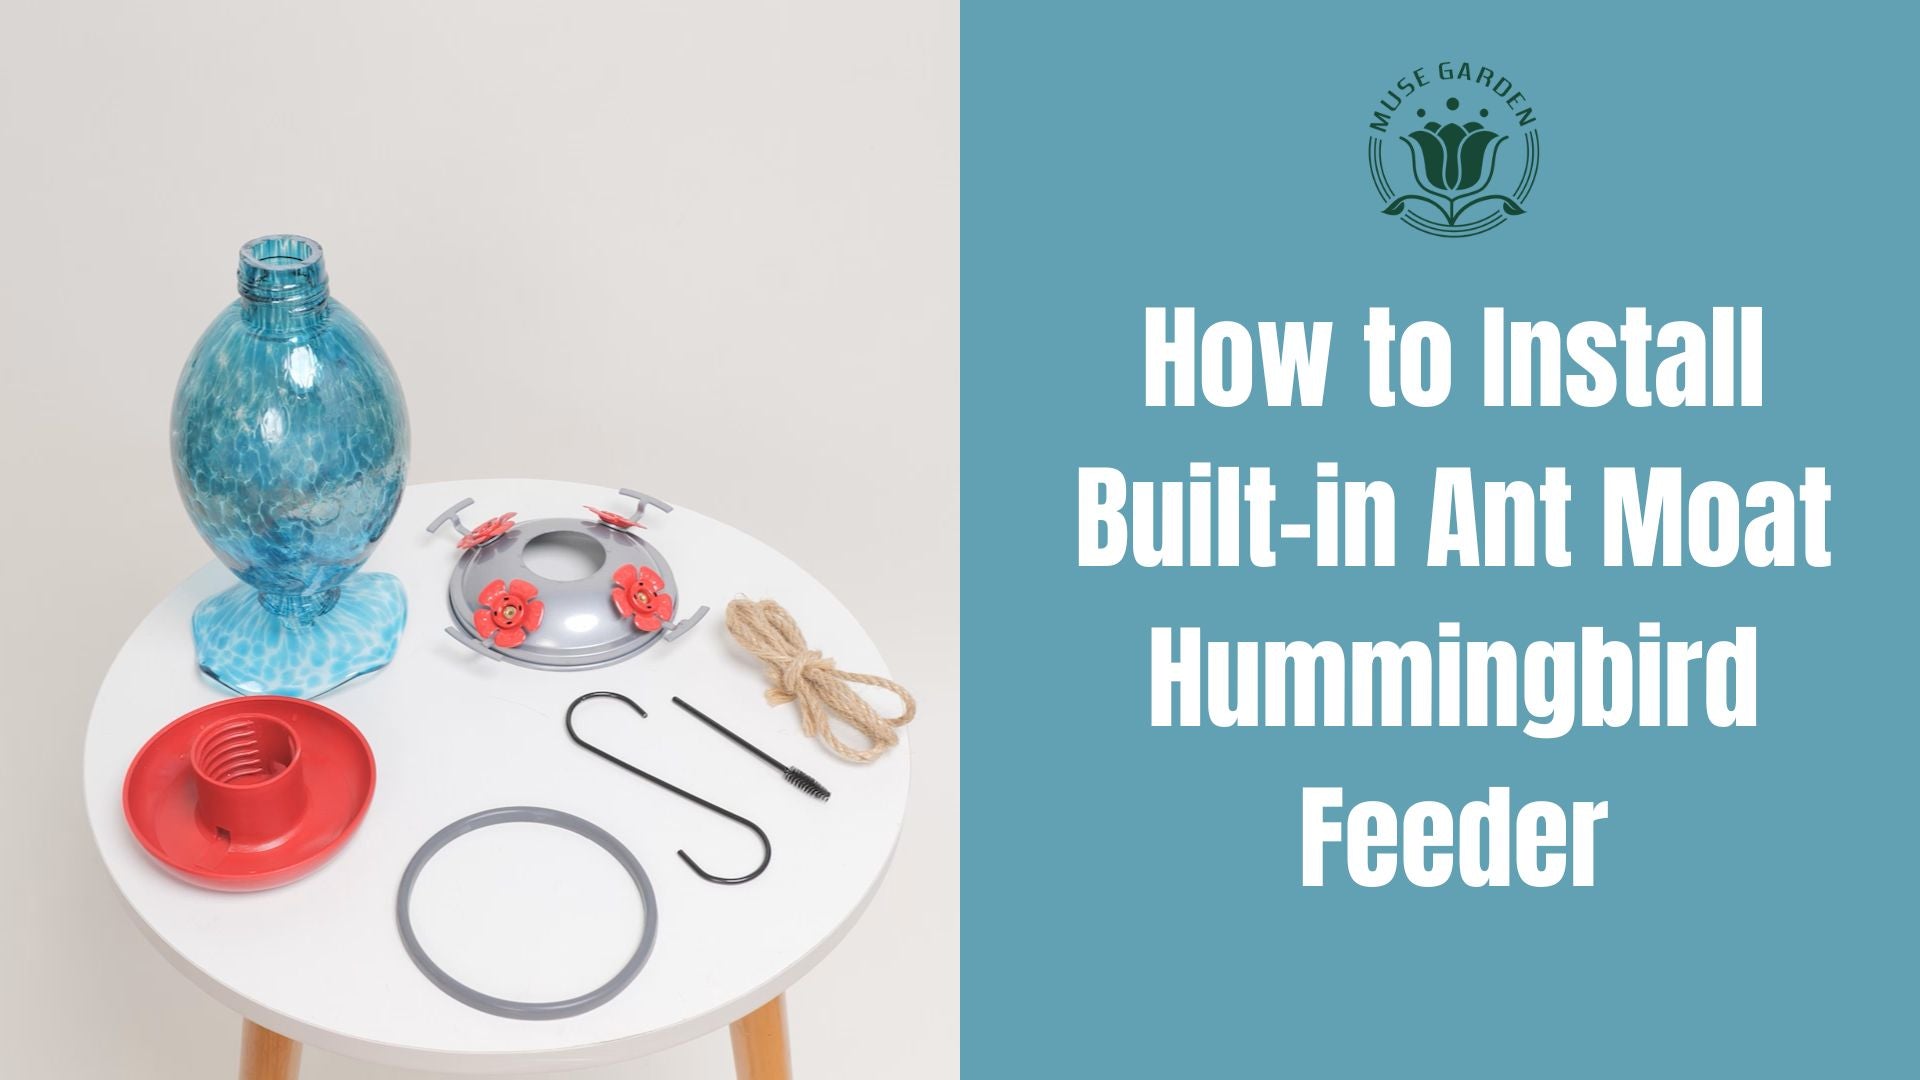 Load video: Video_How to install built in ant moat hummingbird feeder